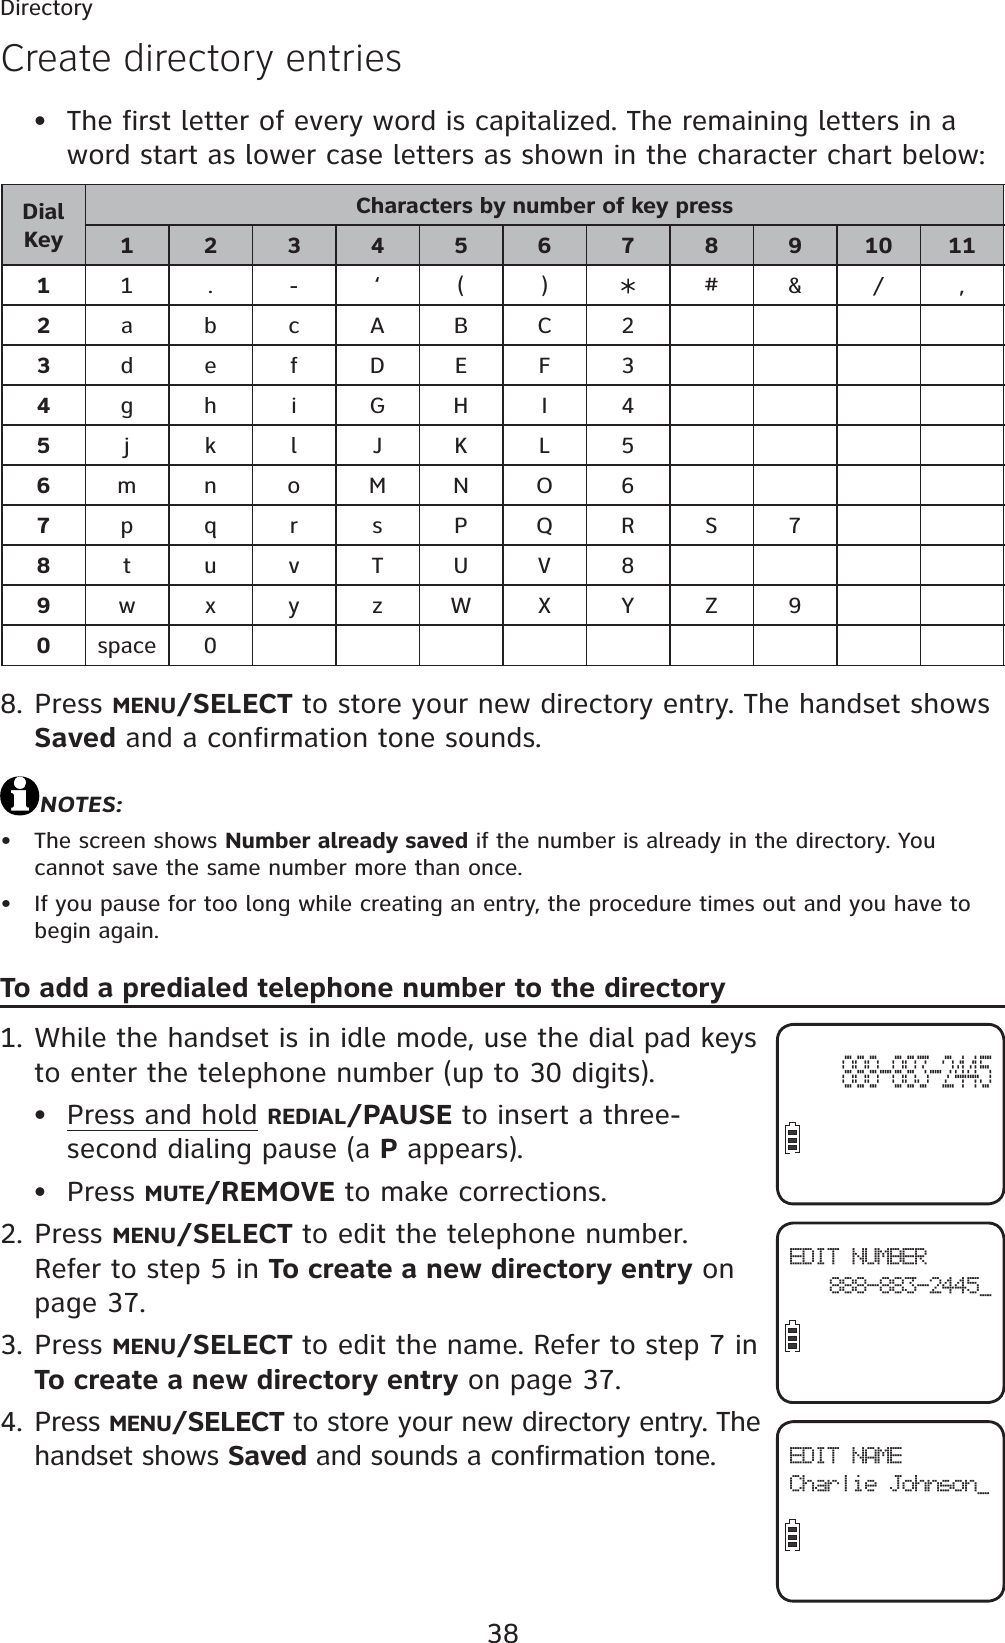 38DirectoryThe first letter of every word is capitalized. The remaining letters in a word start as lower case letters as shown in the character chart below:DialKeyCharacters by number of key press123456789101111.- ‘ () #&amp;/ ,2abcABC23defDEF34gh iGHI 45jklJKL56mn oMNO67pqr sPQRS78tuvTUV89wx y zWXYZ90space 0Press MENU/SELECT to store your new directory entry. The handset shows Saved and a confirmation tone sounds.NOTES:The screen shows Number already saved if the number is already in the directory. You cannot save the same number more than once.If you pause for too long while creating an entry, the procedure times out and you have to begin again.To add a predialed telephone number to the directoryWhile the handset is in idle mode, use the dial pad keys to enter the telephone number (up to 30 digits).Press and hold REDIAL/PAUSE to insert a three-second dialing pause (a P appears).Press MUTE/REMOVE to make corrections.Press MENU/SELECT to edit the telephone number. Refer to step 5 in To create a new directory entry on page 37.Press MENU/SELECT to edit the name. Refer to step 7 in To create a new directory entry on page 37.Press MENU/SELECT to store your new directory entry. The handset shows Saved and sounds a confirmation tone.•8.••1.••2.3.4.Create directory entriesEDIT NUMBER888-883-2445_EDIT NAMECharlie Johnson_888-883-2445